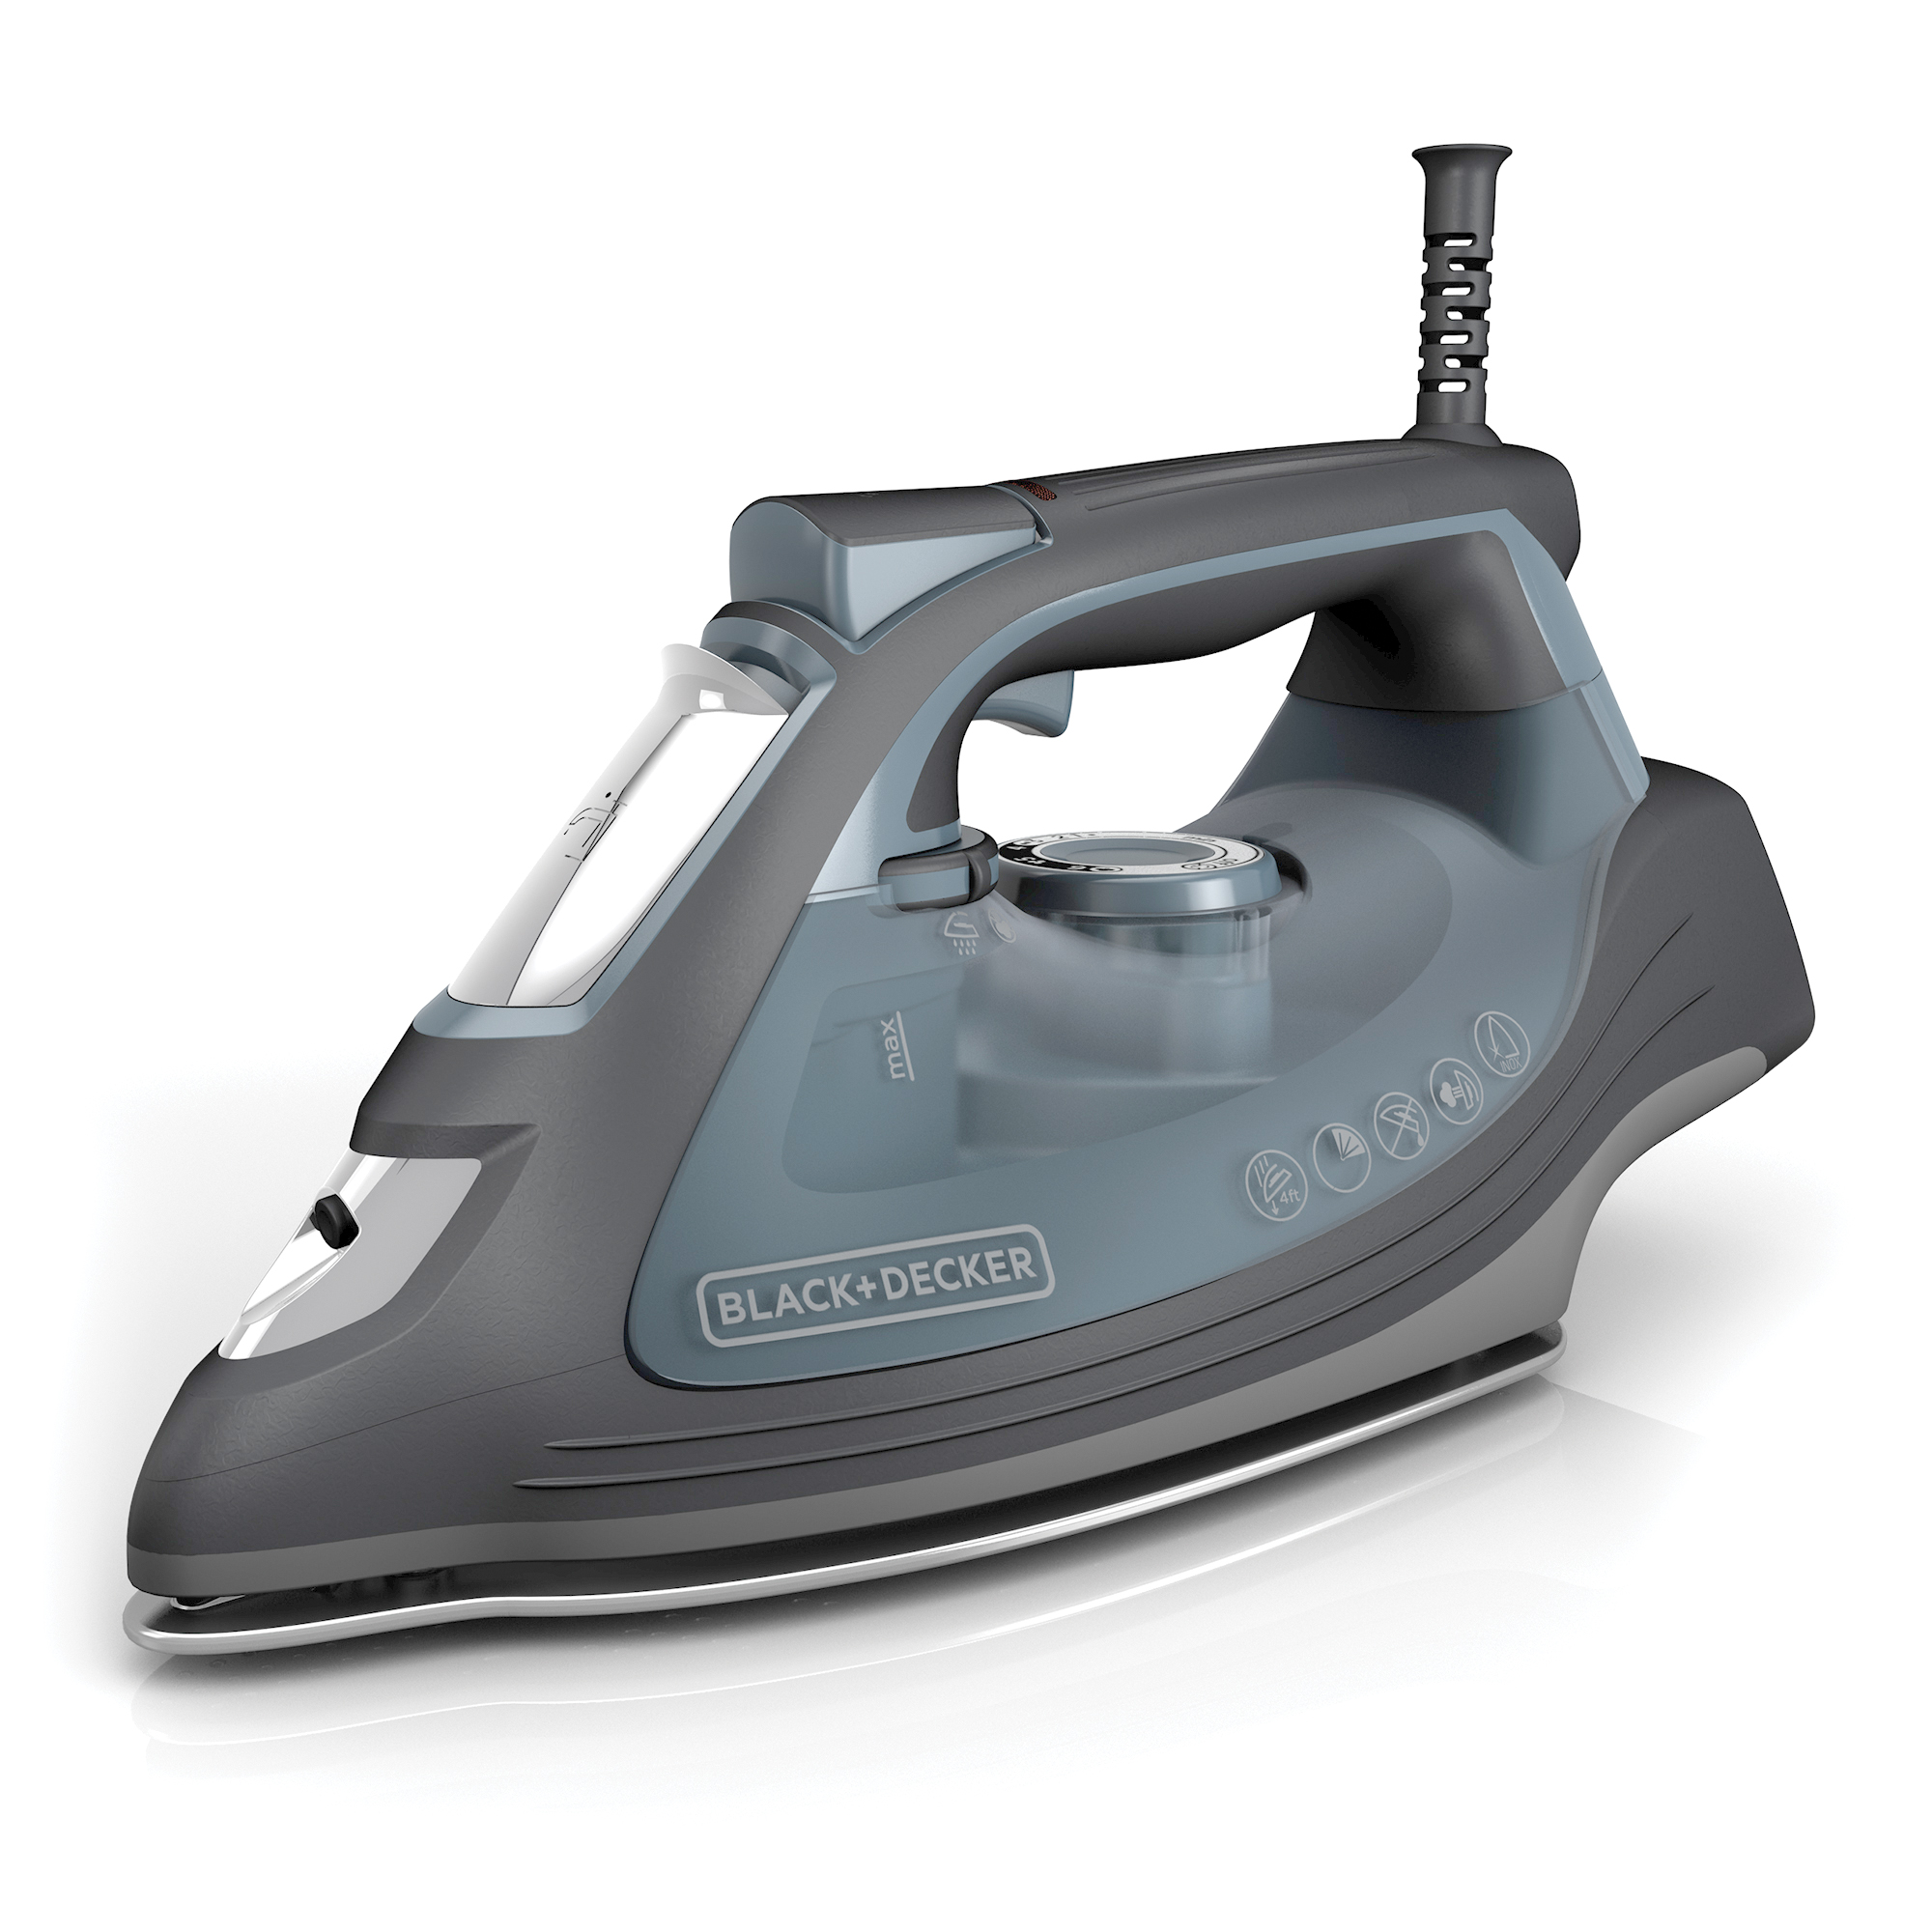 BLACK+DECKER IMPACT Advanced Steam Iron with Maximum Durability and 360° Pivoting Cord, Gray, IR3000 - image 1 of 11